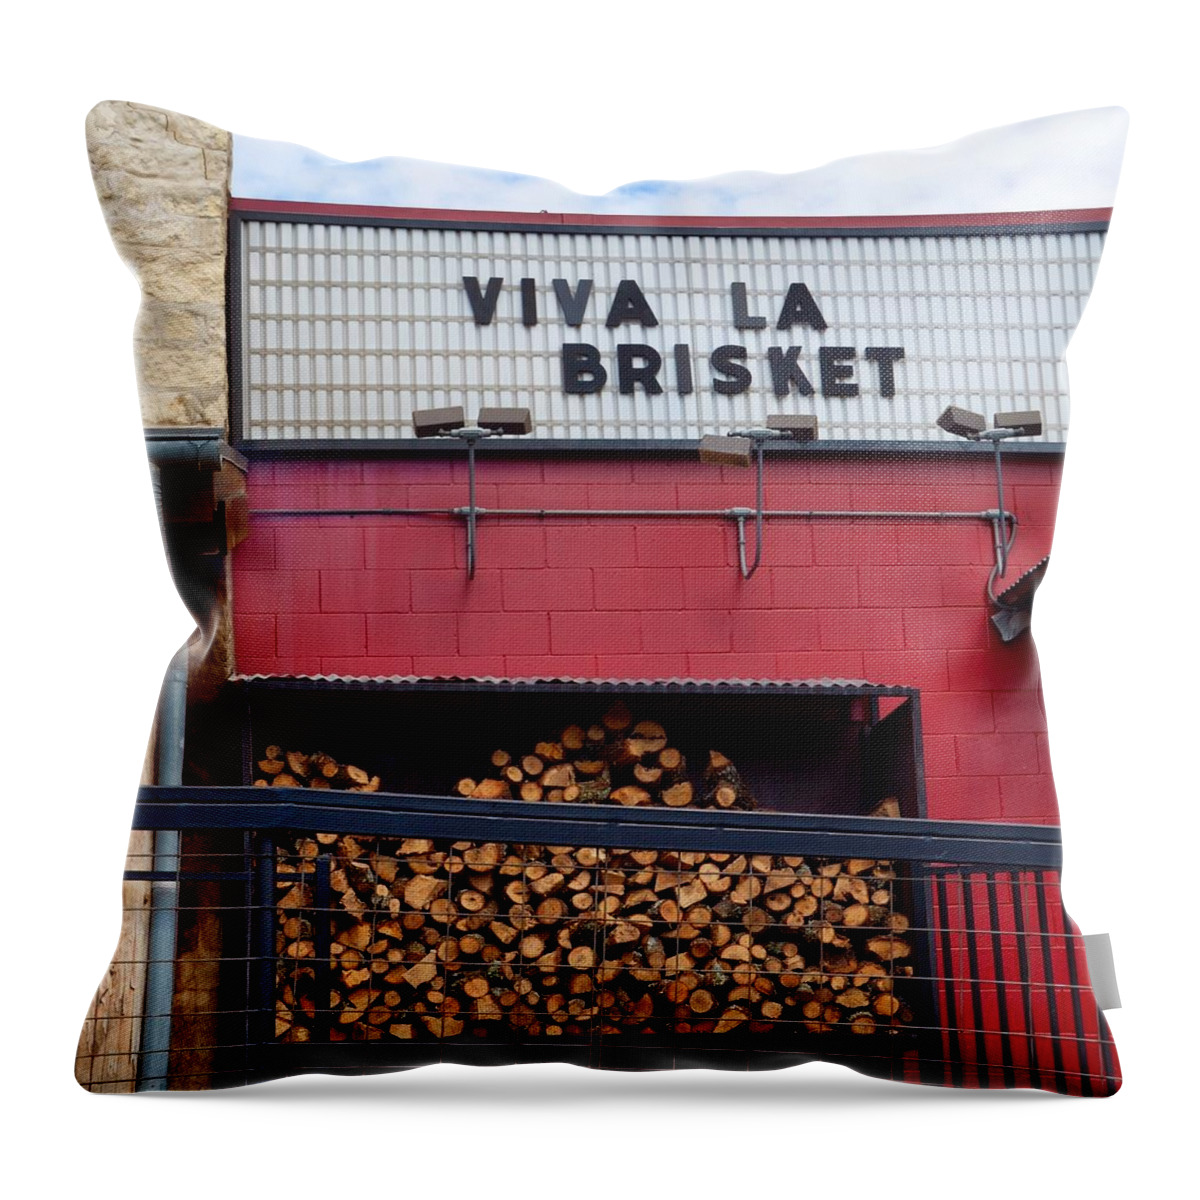 Brisket Throw Pillow featuring the photograph Viva La Brisket by Gia Marie Houck